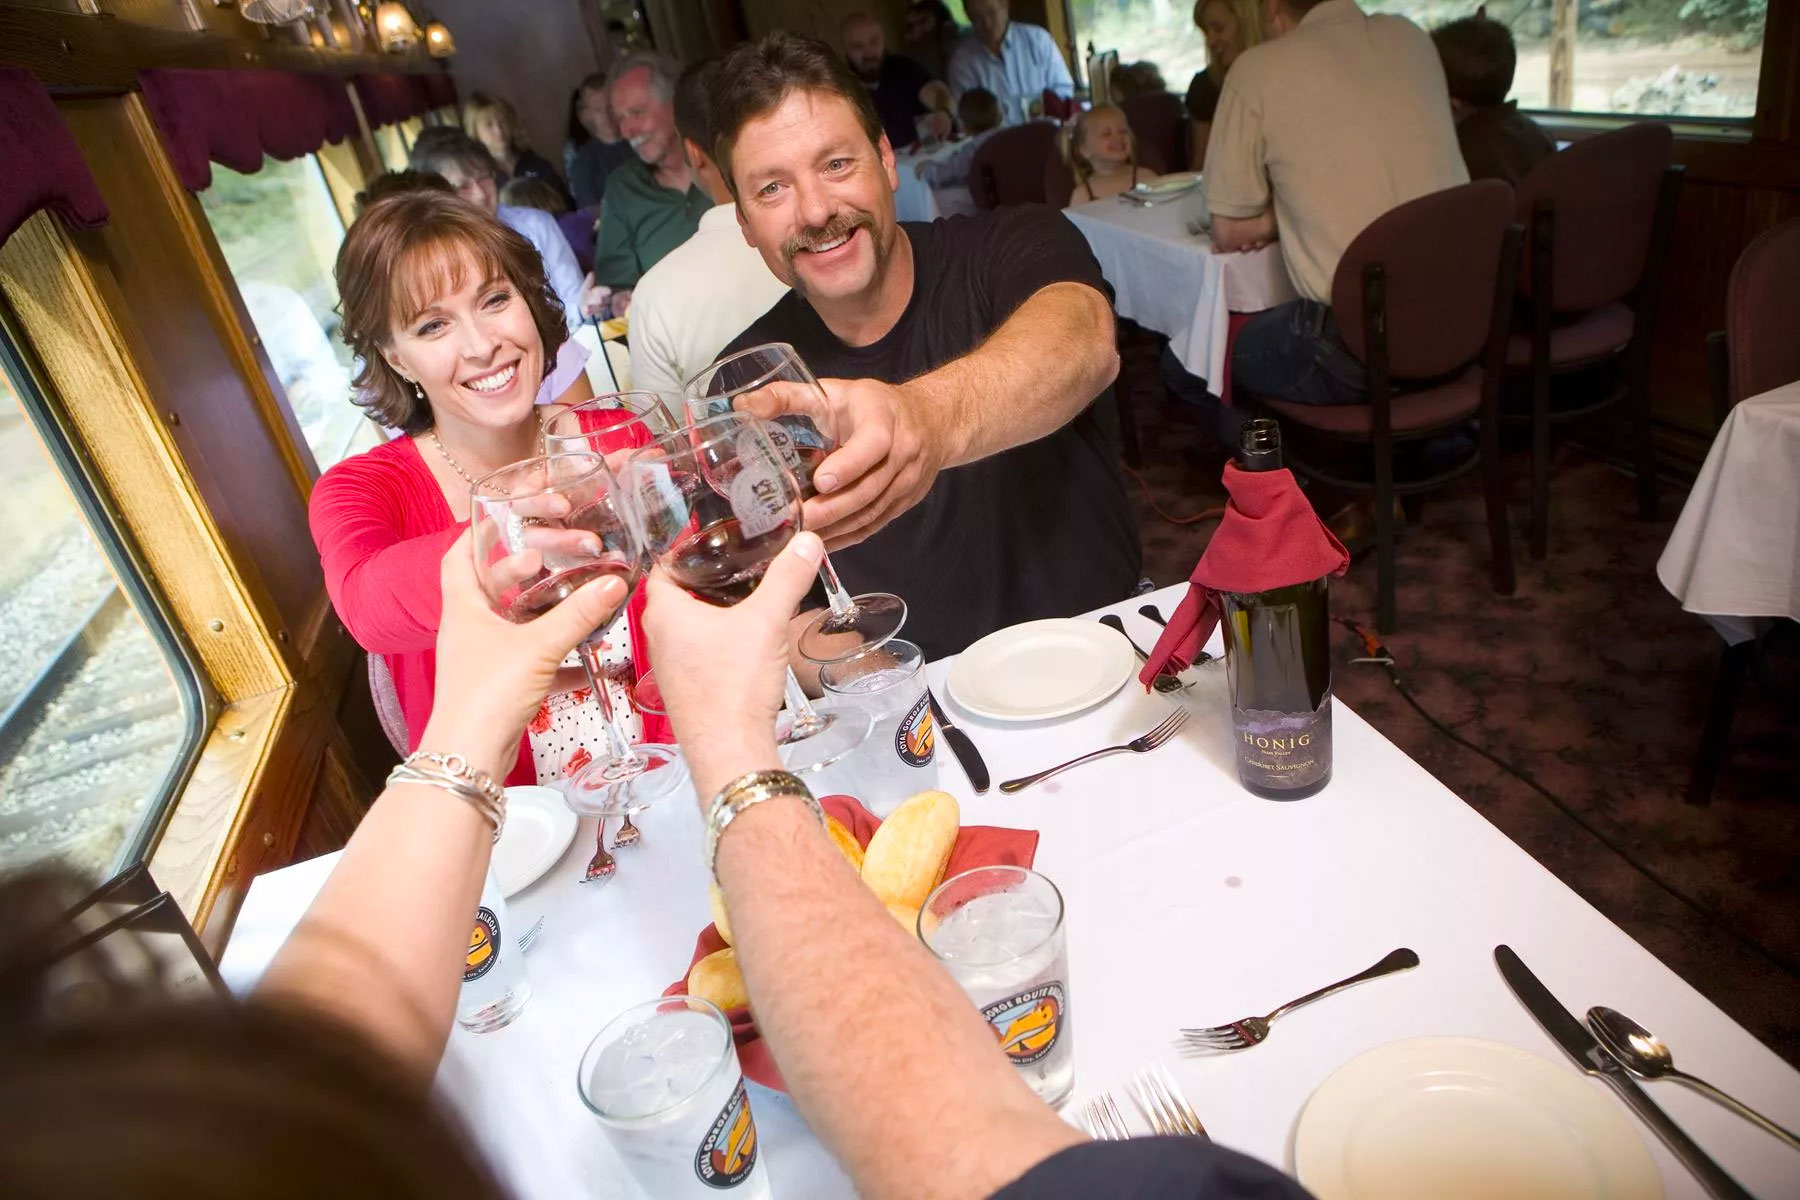 The Colorado Wine Train Pairs Memorable Scenery With Local Wines